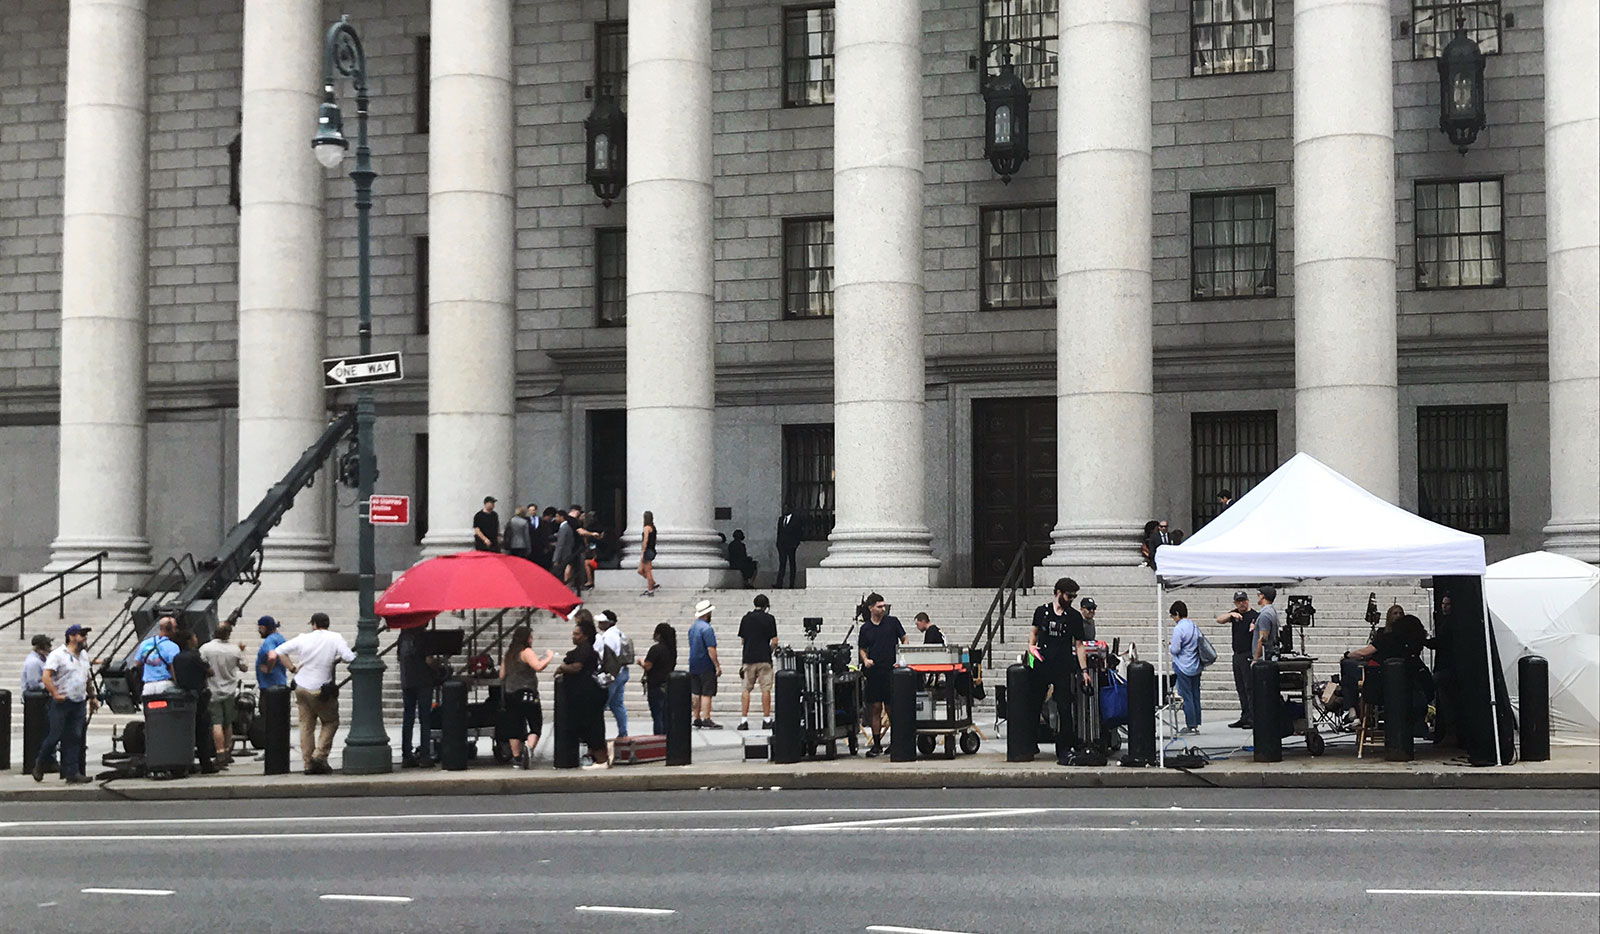 A film crew and equipment on the sidewalk outside of a gray governmental-looking building with big columns